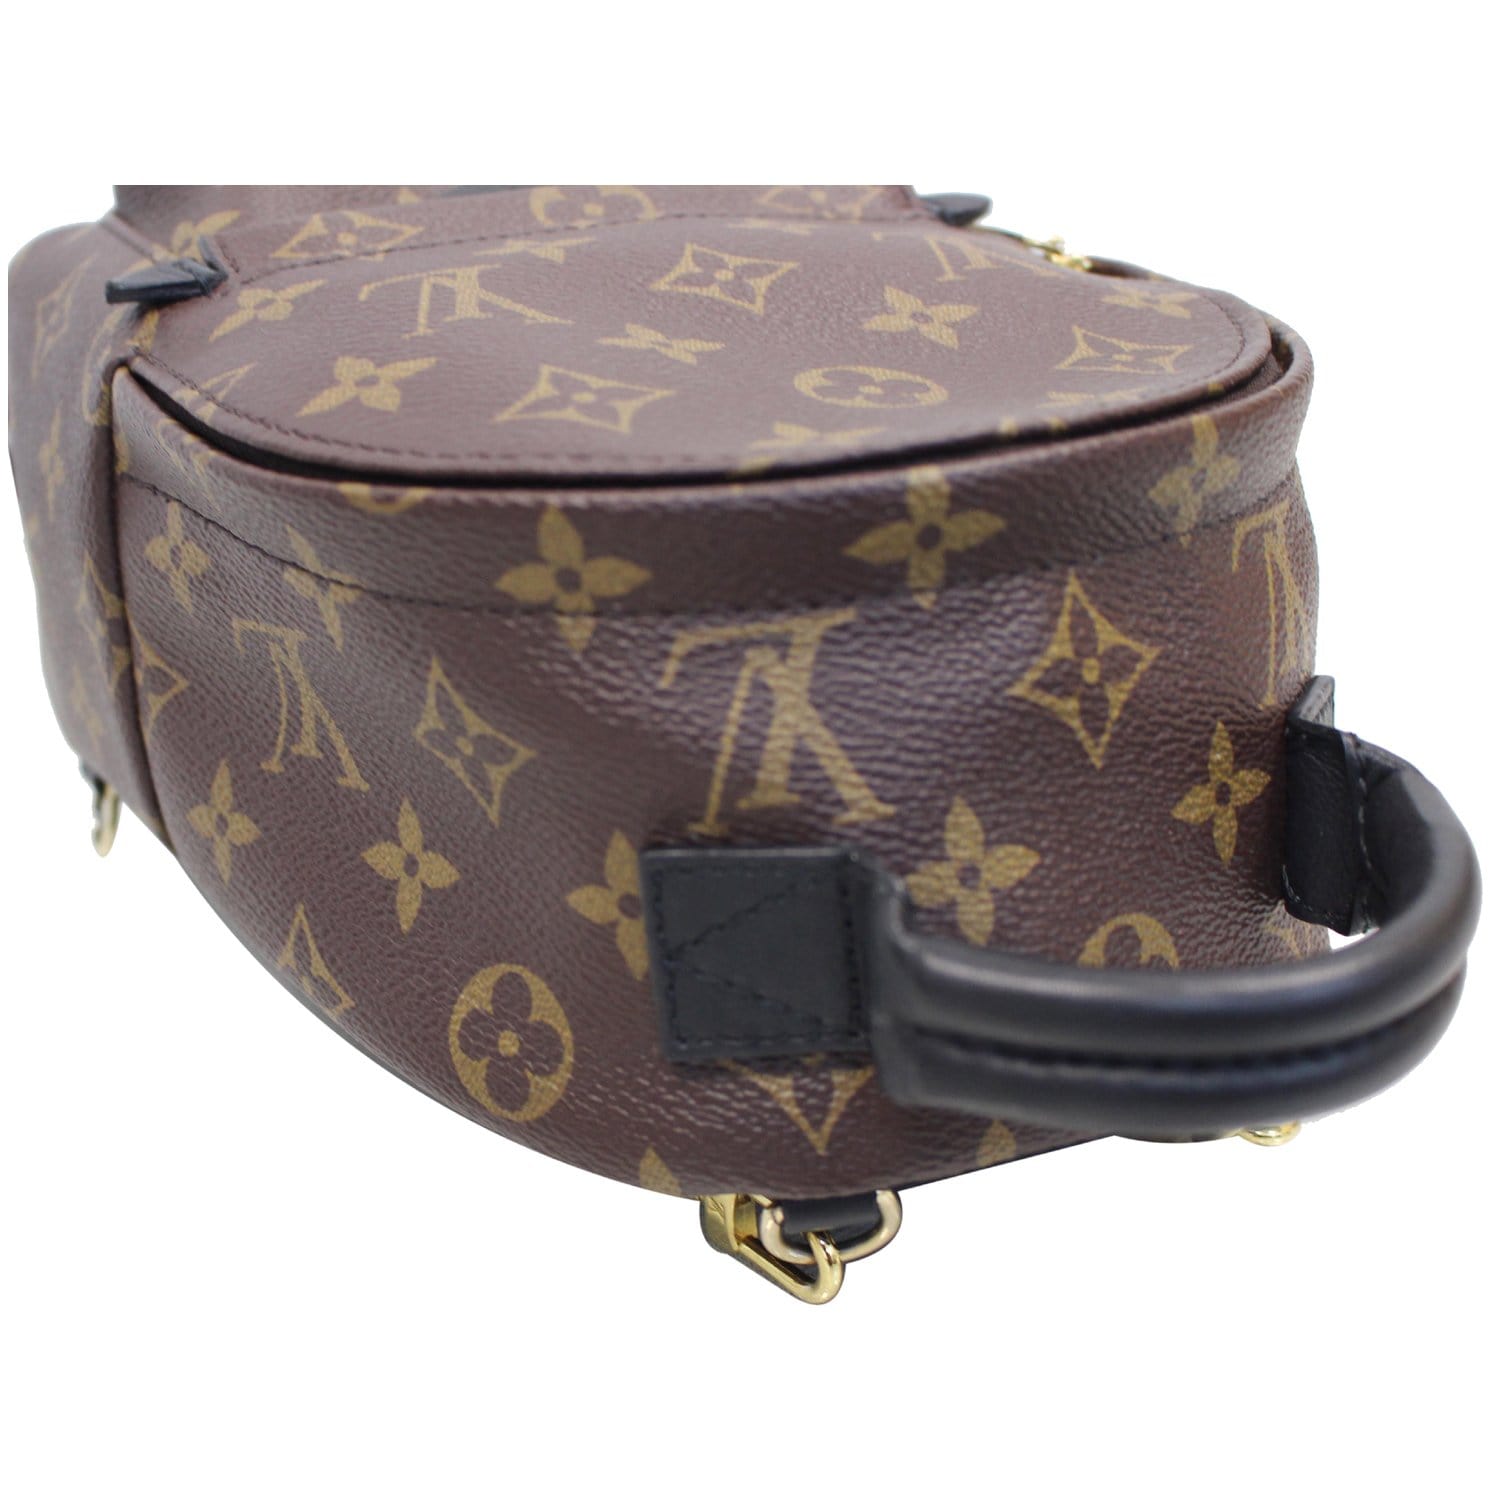 Palm springs cloth backpack Louis Vuitton Brown in Cloth - 27153719